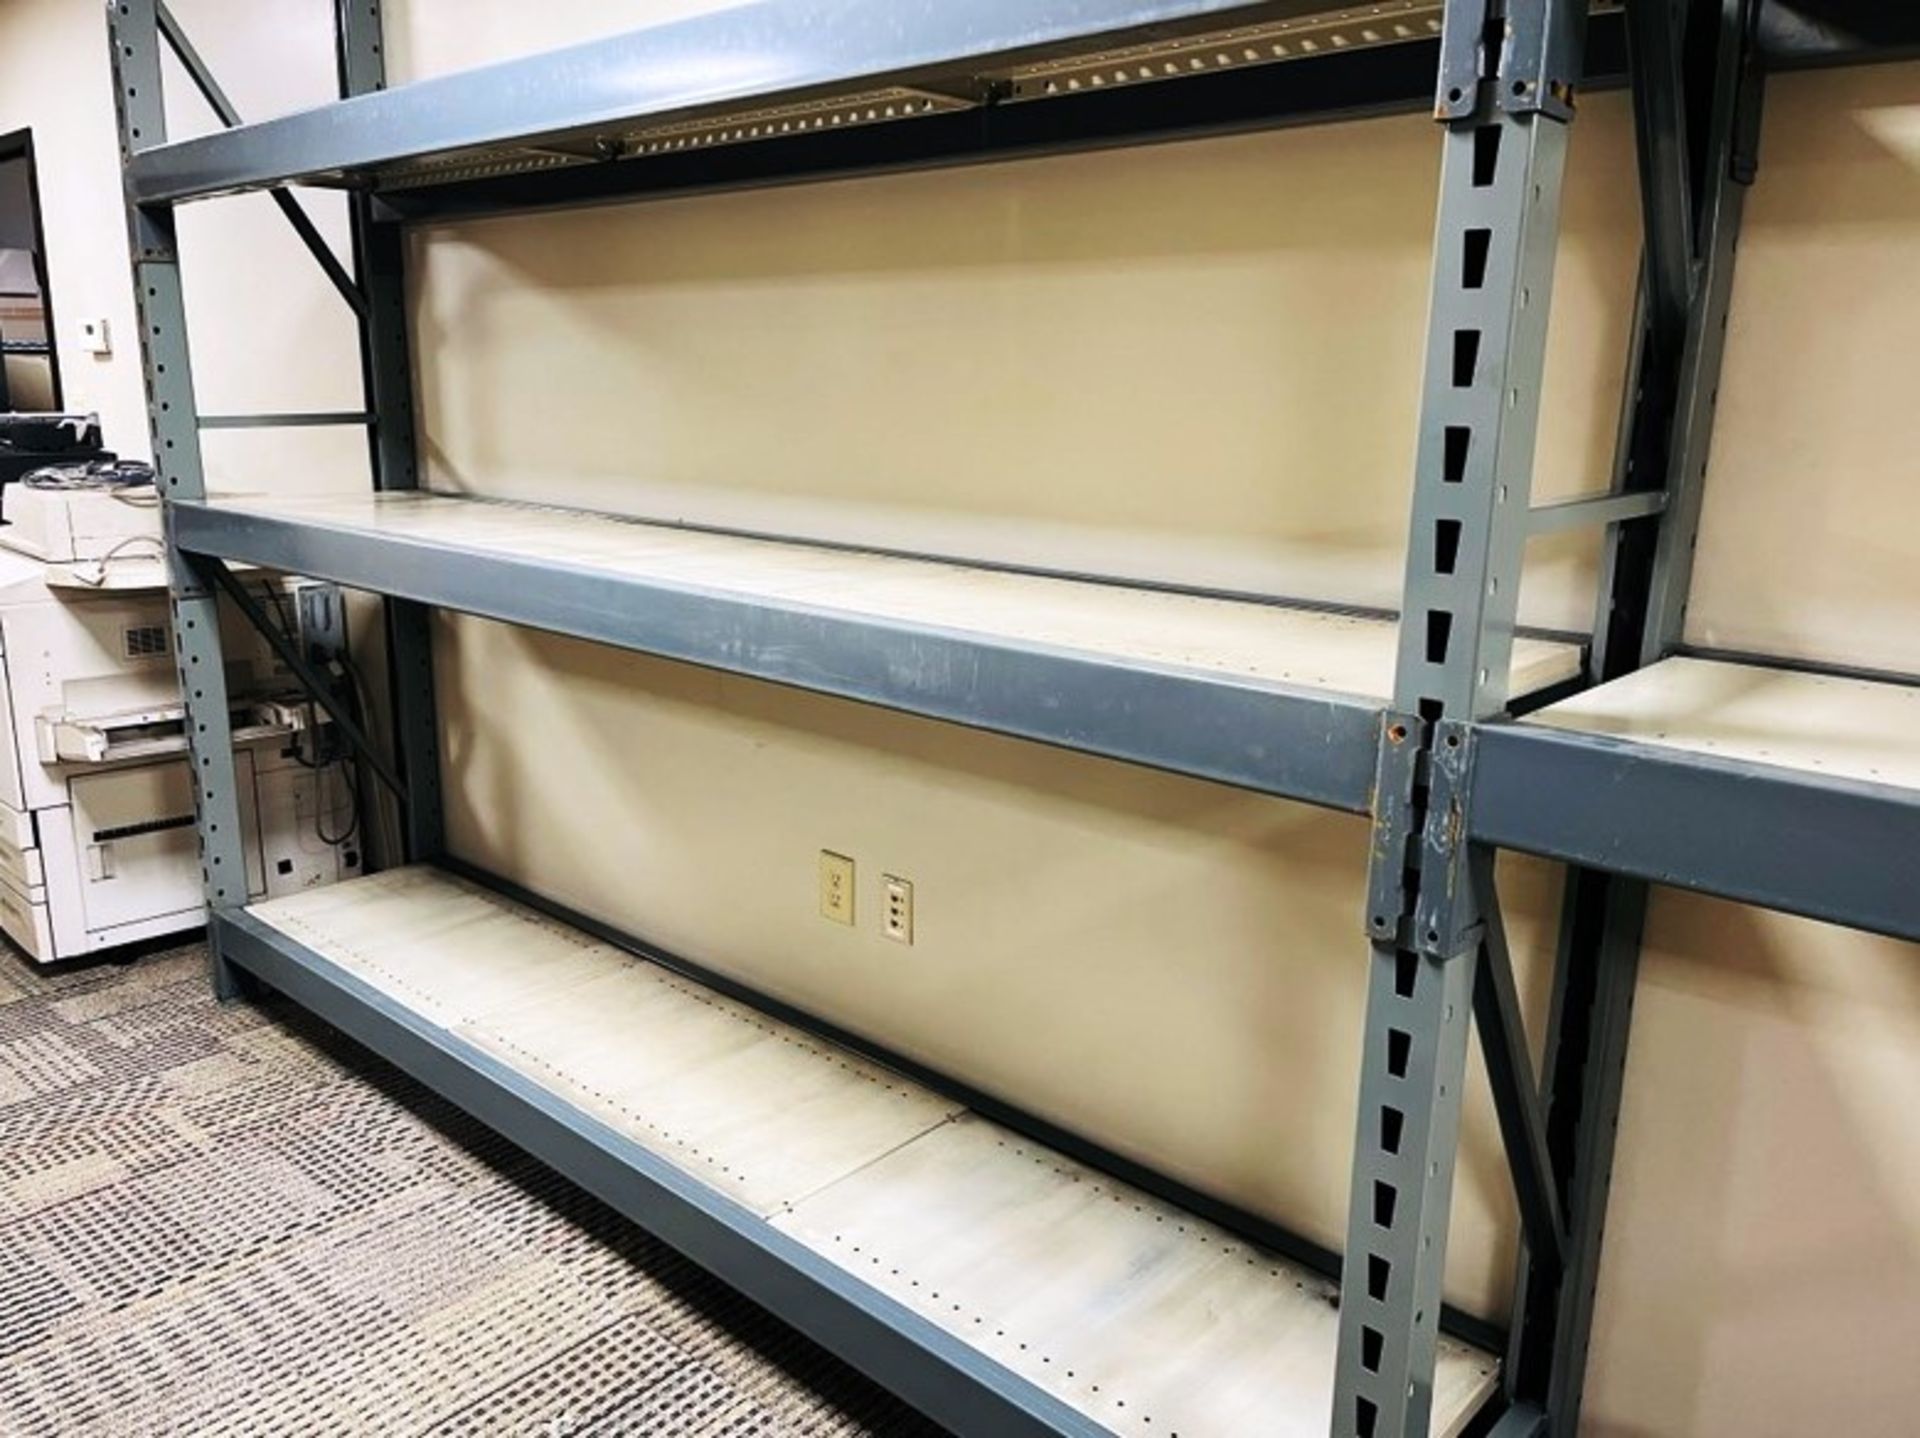 10 SECTION OF RETAIL/MERCHANDISE PALLET RACK SHELVING 6'H X 21.5"D X 108"L WITH 3 SHELVES - Image 4 of 4